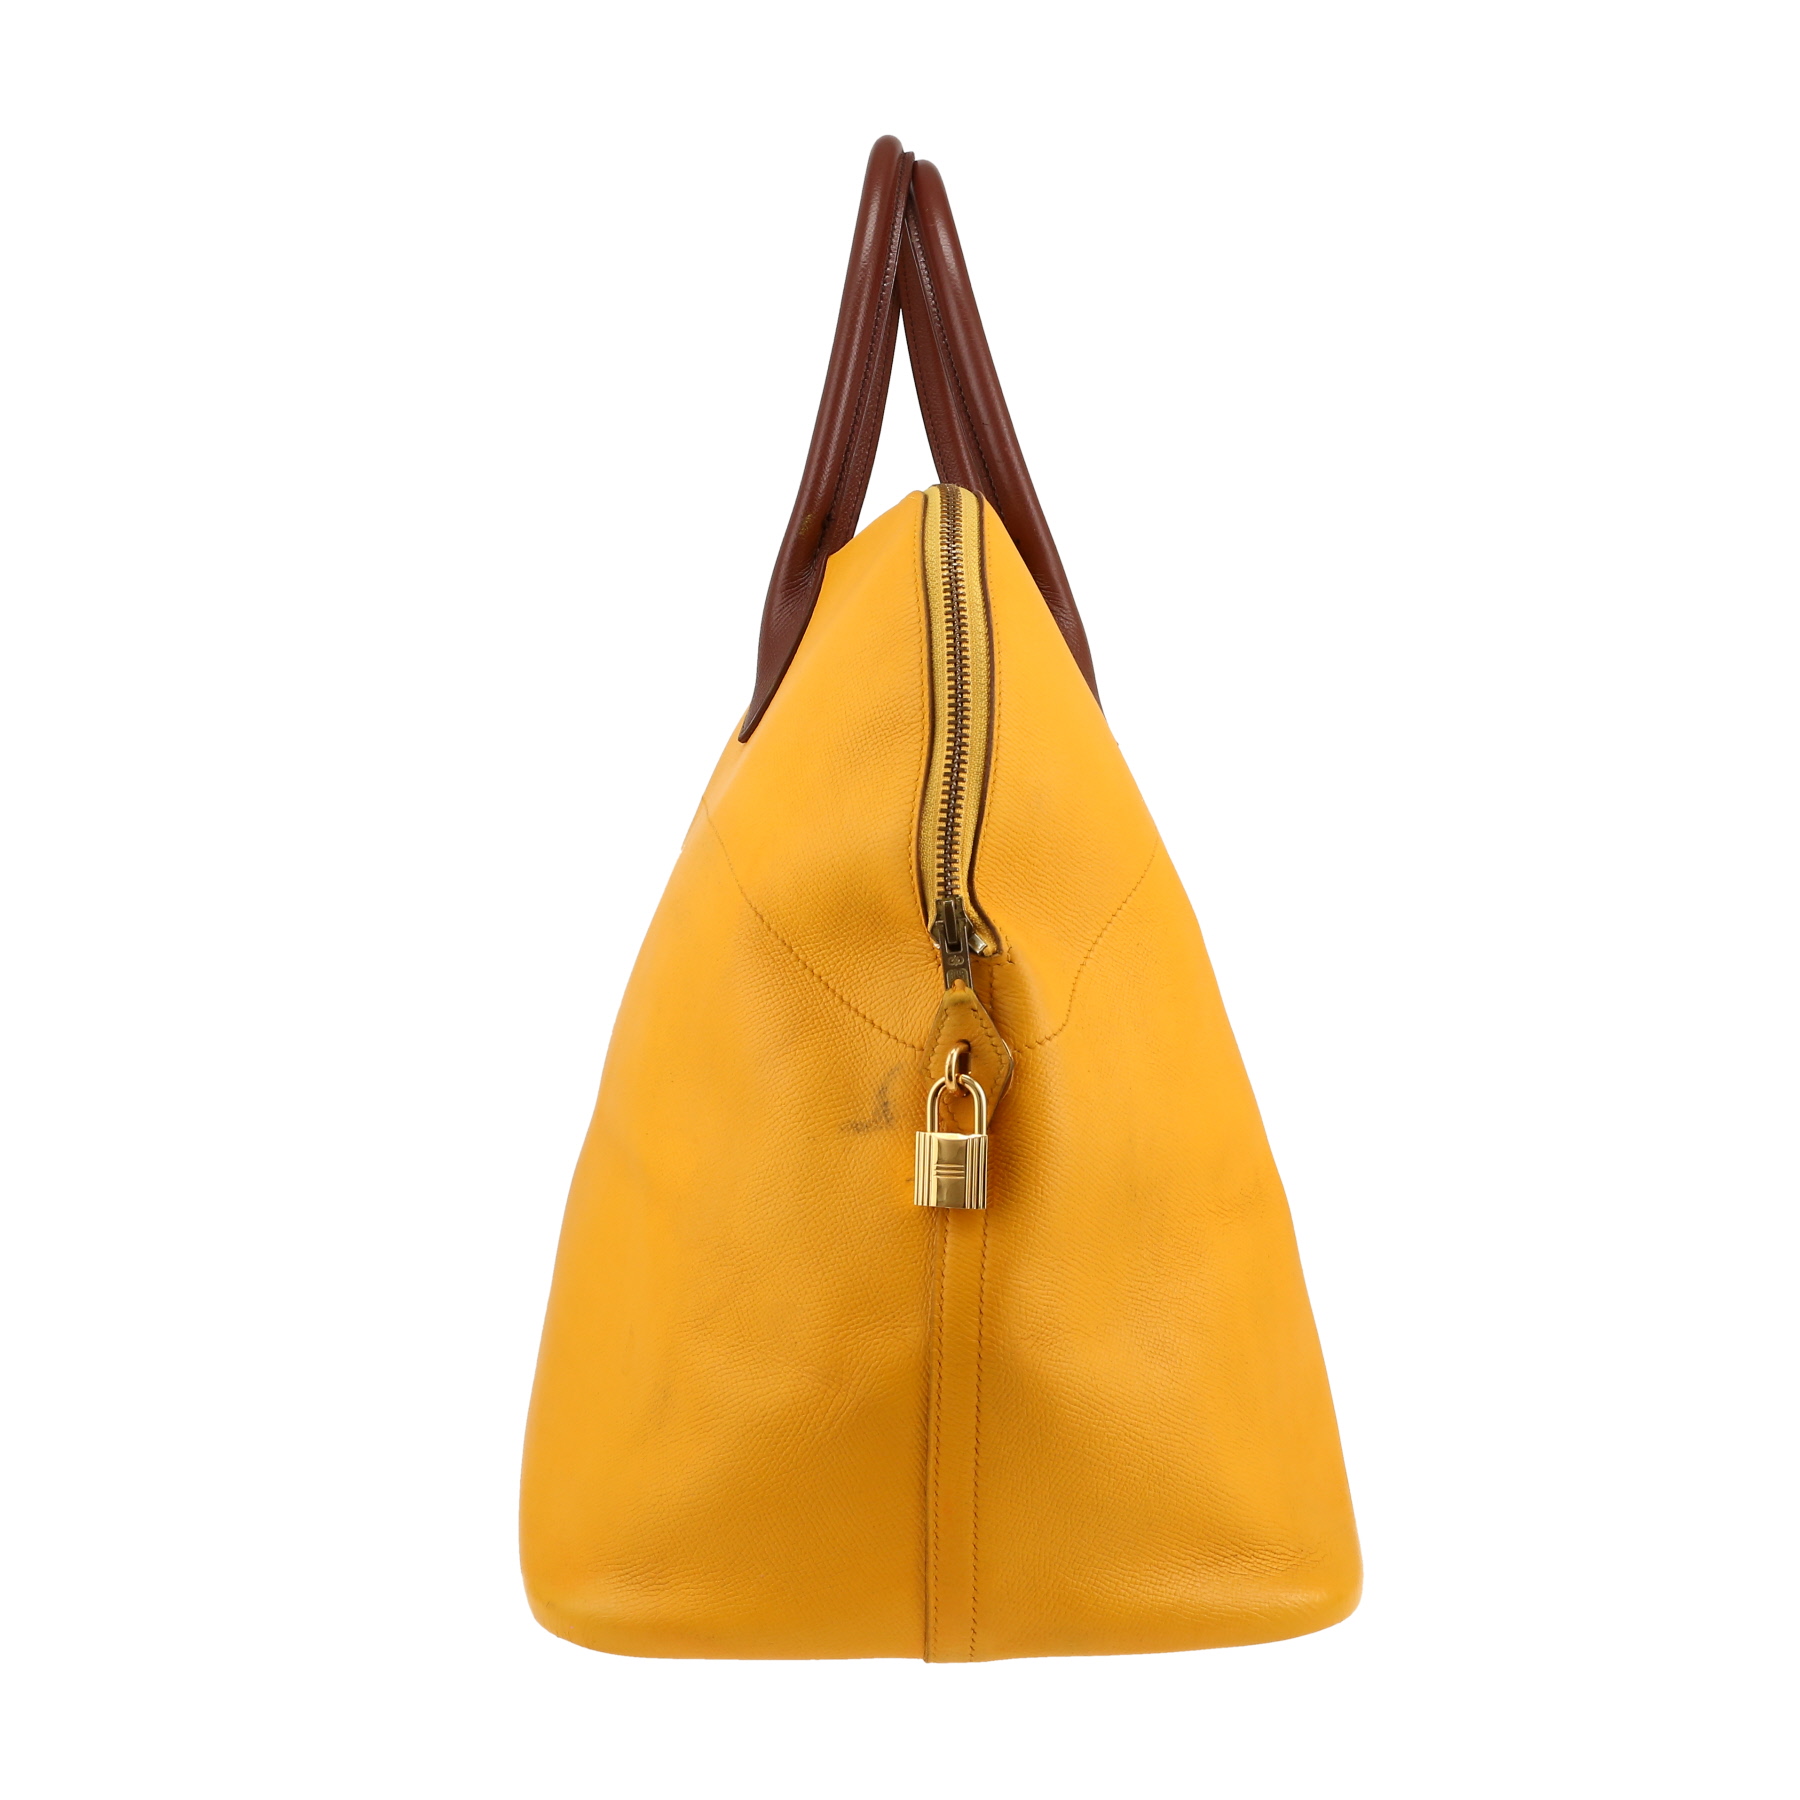 Bolide Travel Bag Travel Bag In Yellow And Brown